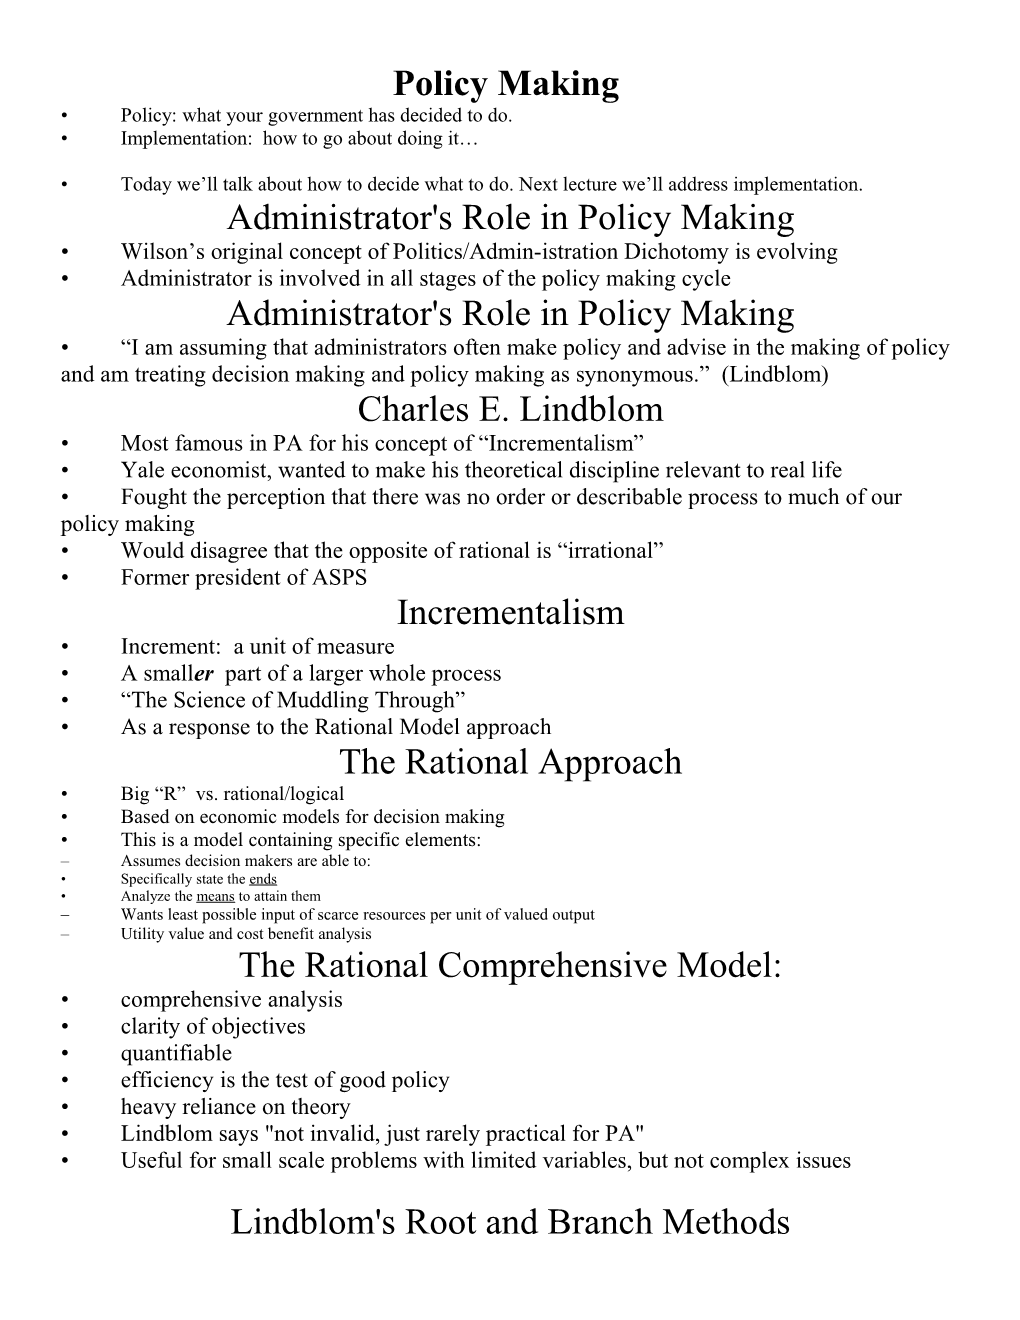 Policy Making (Policy Making Incrementalism)